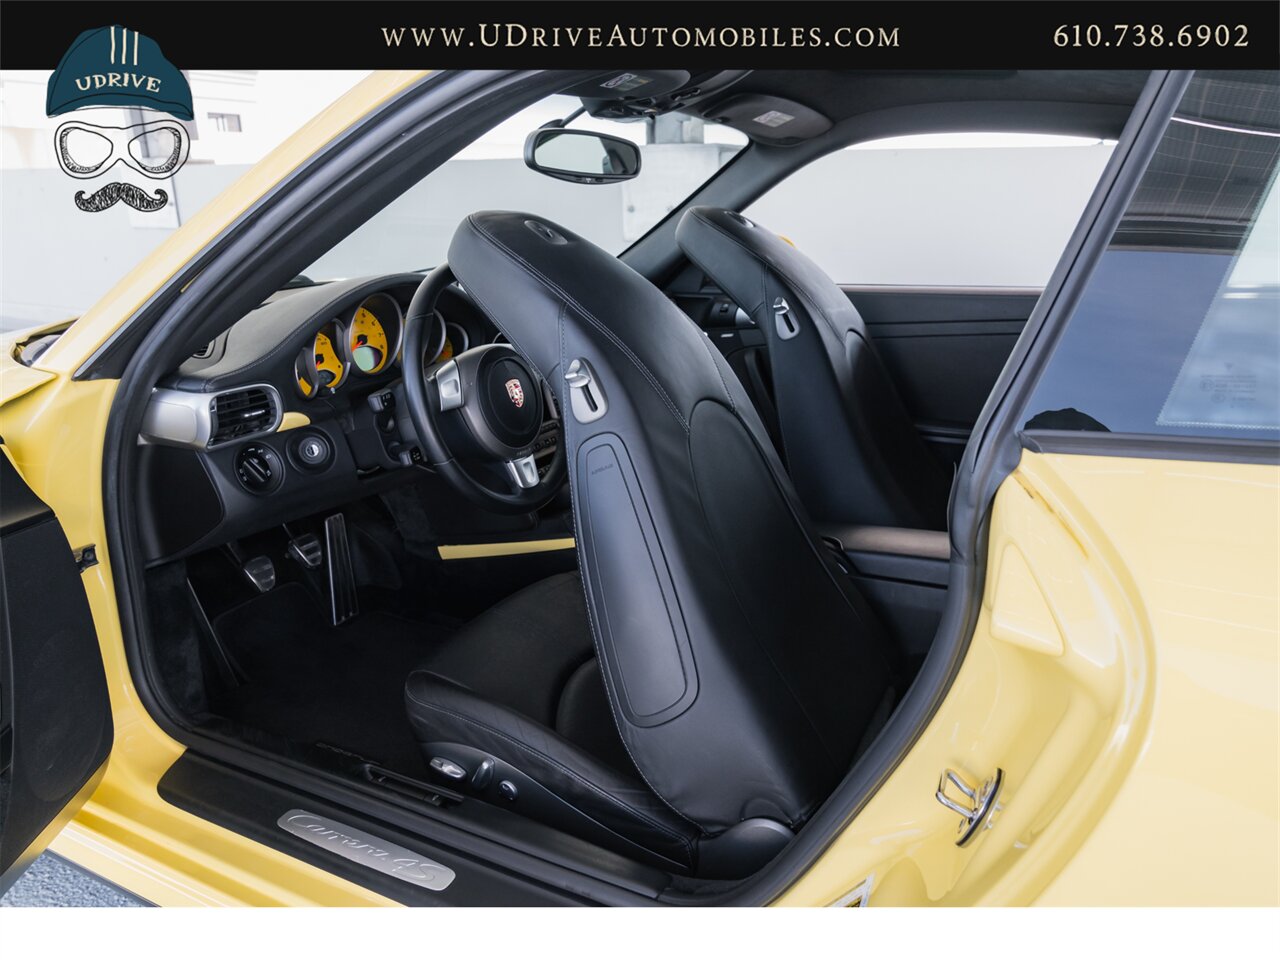 2007 Porsche 911 Carrera 4S 997 C4S Paint To Sample Pastel Yellow  6 Speed Sport Chrono Full Leather Yellow Gauges - Photo 29 - West Chester, PA 19382